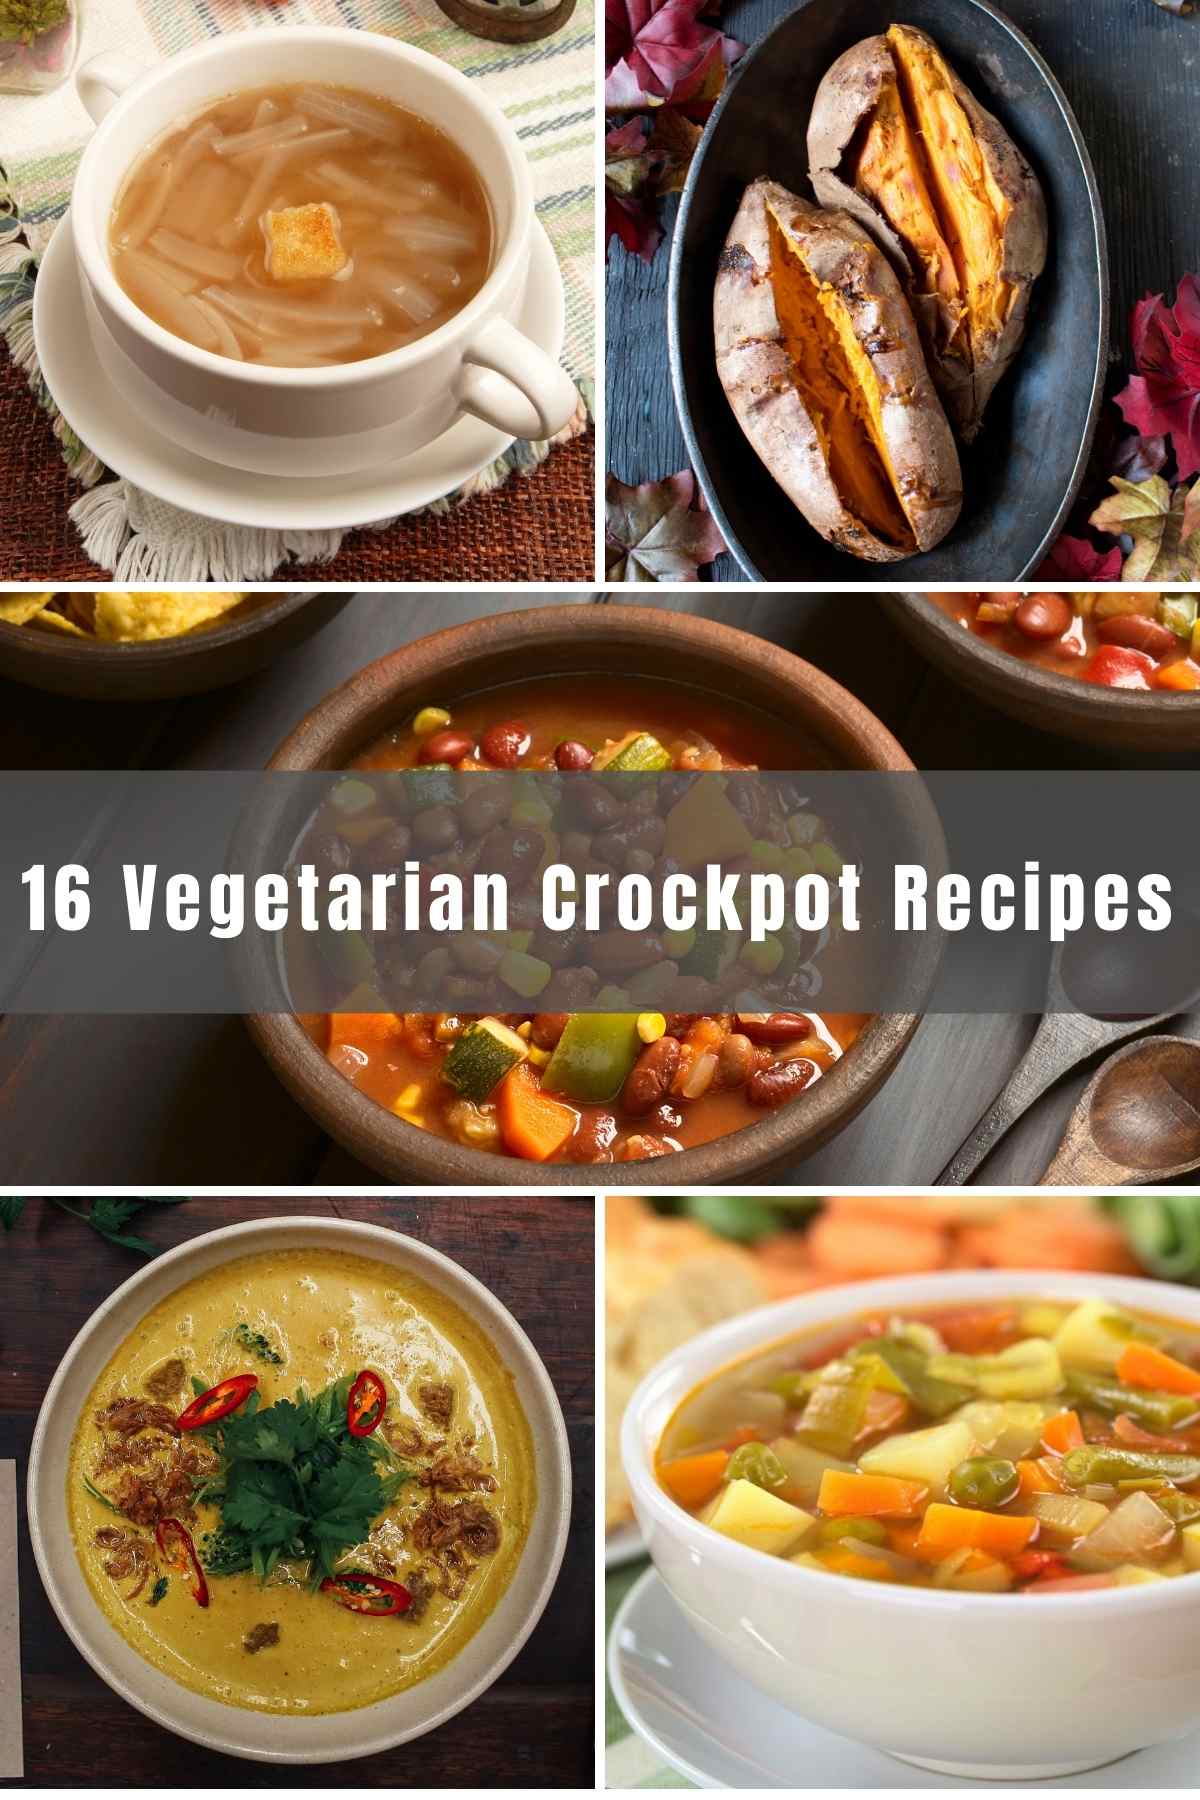 Crockpots offer a great deal of convenience to home cooks. If you’re following a vegetarian lifestyle, there’s no shortage of meatless meals to easily prepare with a slow cooker. We’ve gathered some of the best easy and healthy Crockpot Vegetarian Recipes for you to try. With the touch of a couple buttons, you’re able to create a variety of family sized meals from soups, to stews to casseroles.